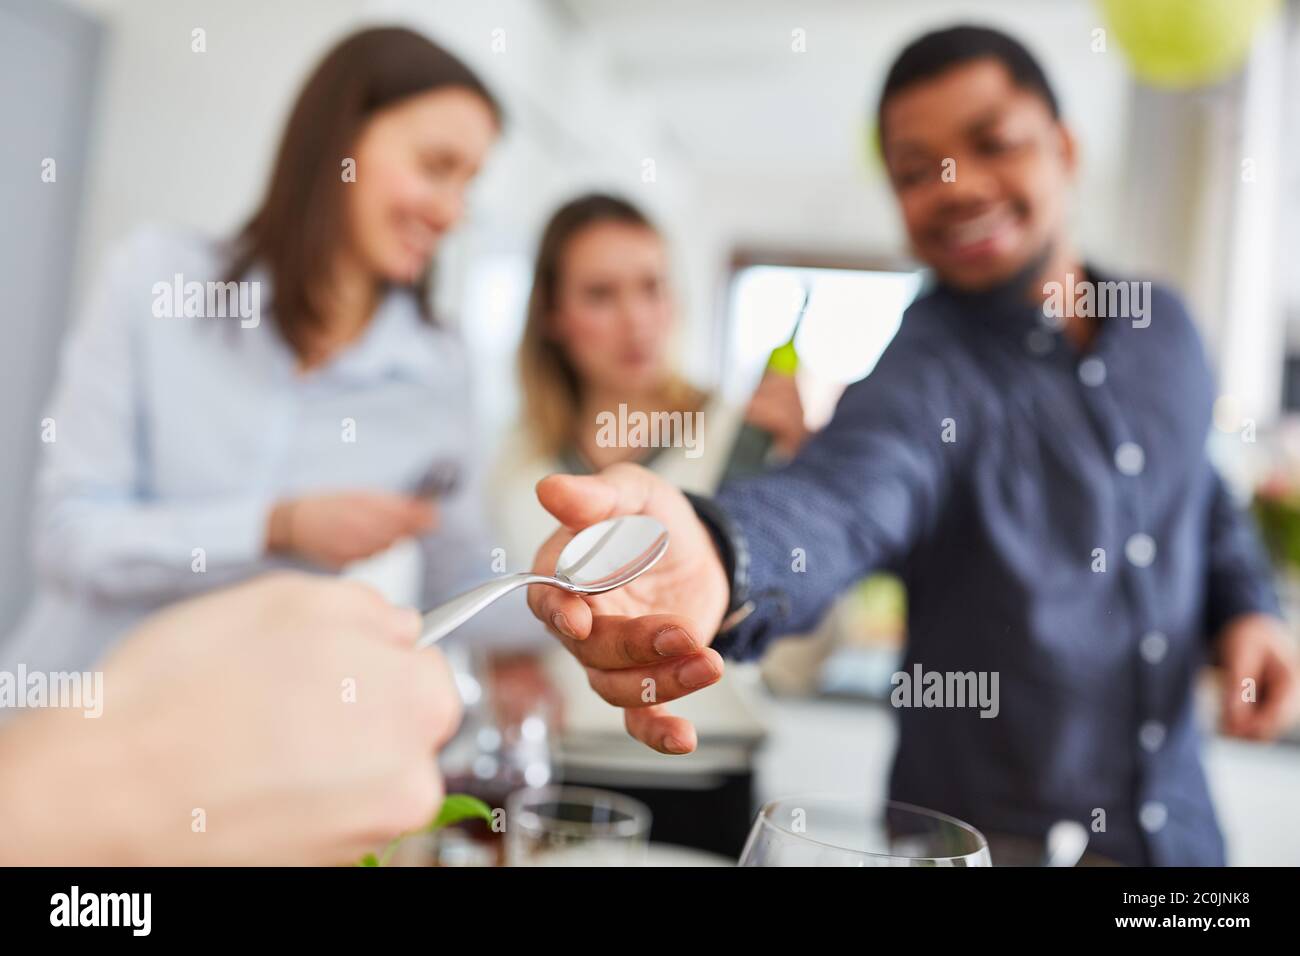 Give the spoon as a saying with friends at the table for a meal together Stock Photo